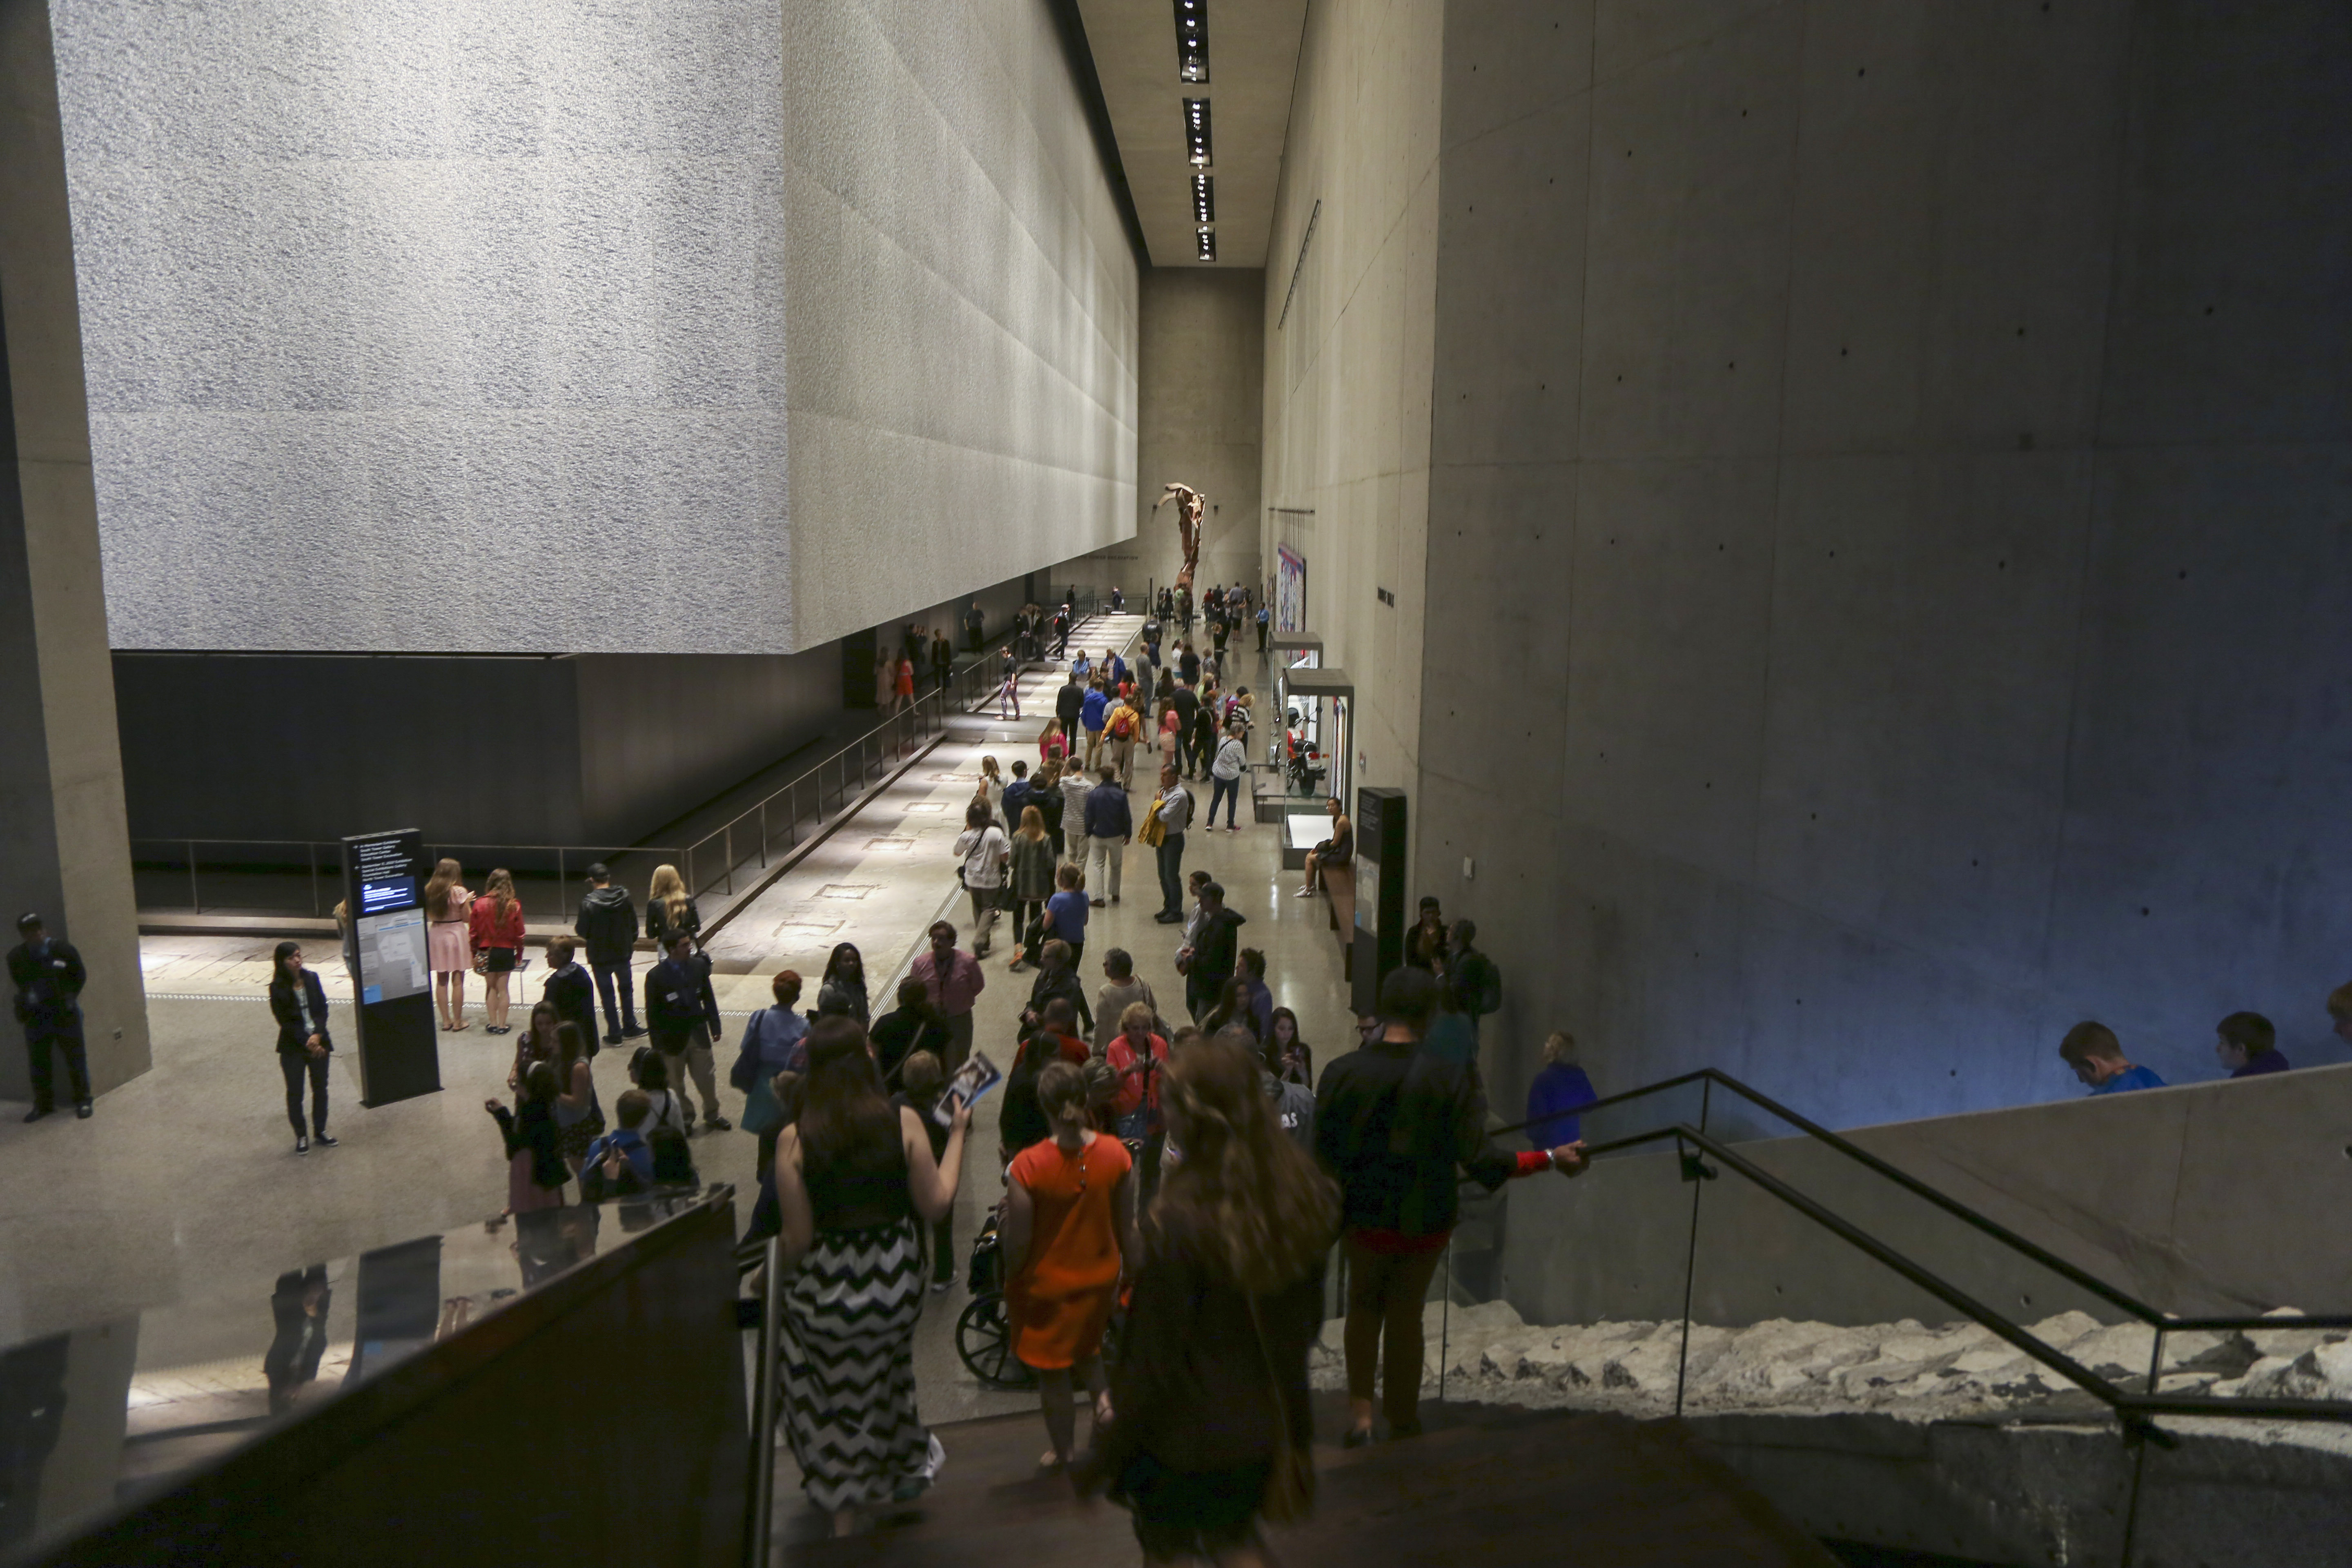 Dozens of visitors are seen in the 9/11 Memorial Museum. In the foreground, visitors pass by the Survivors’ Staircase.